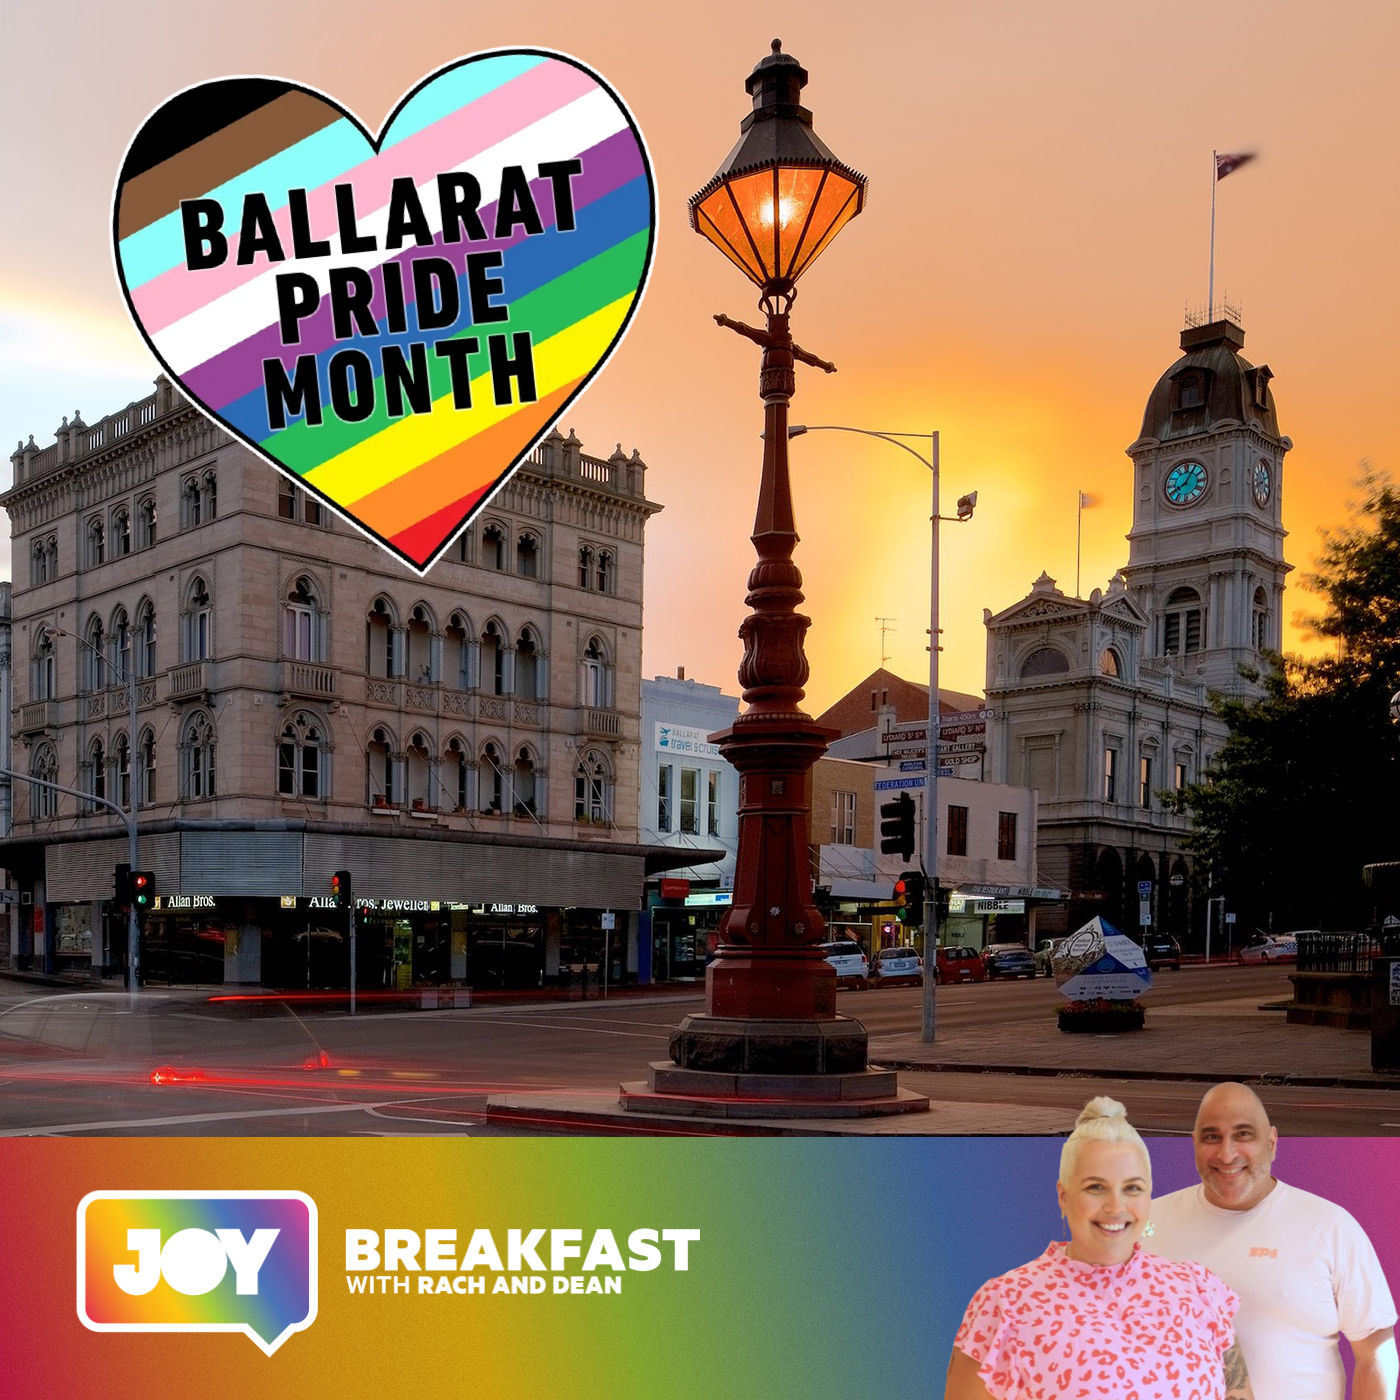 Are you ready for Ballarat Pride Month?